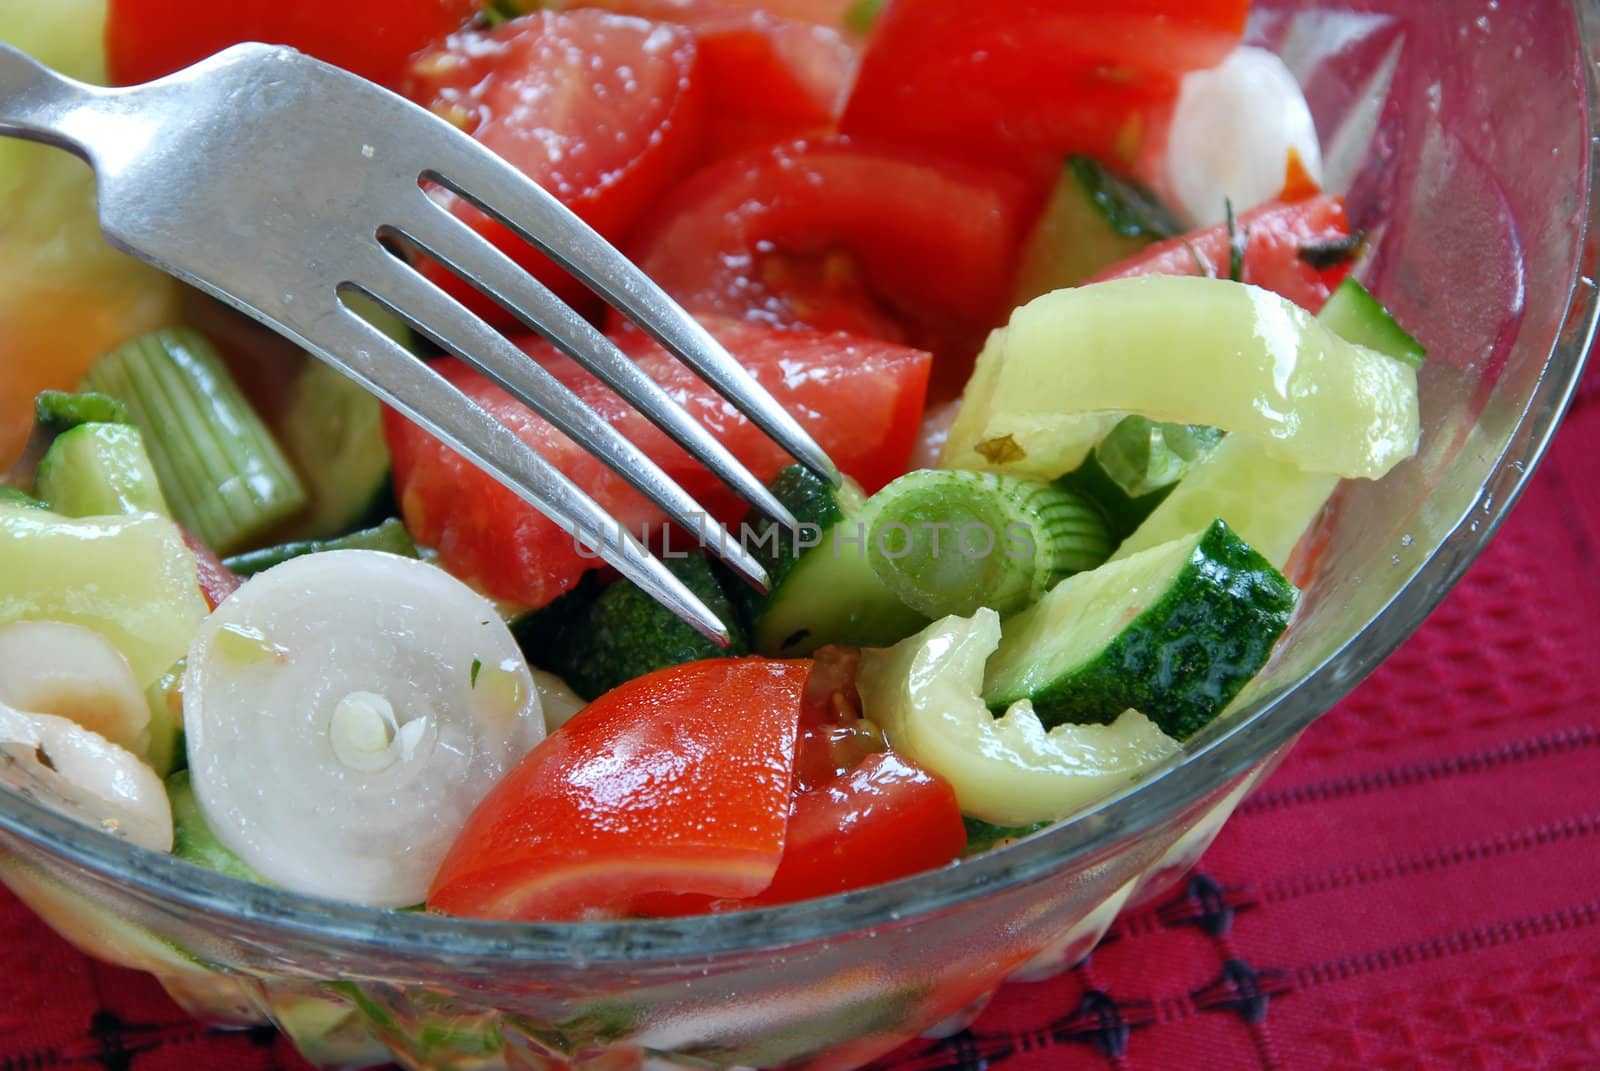 Appetizing vegetable salad by simply